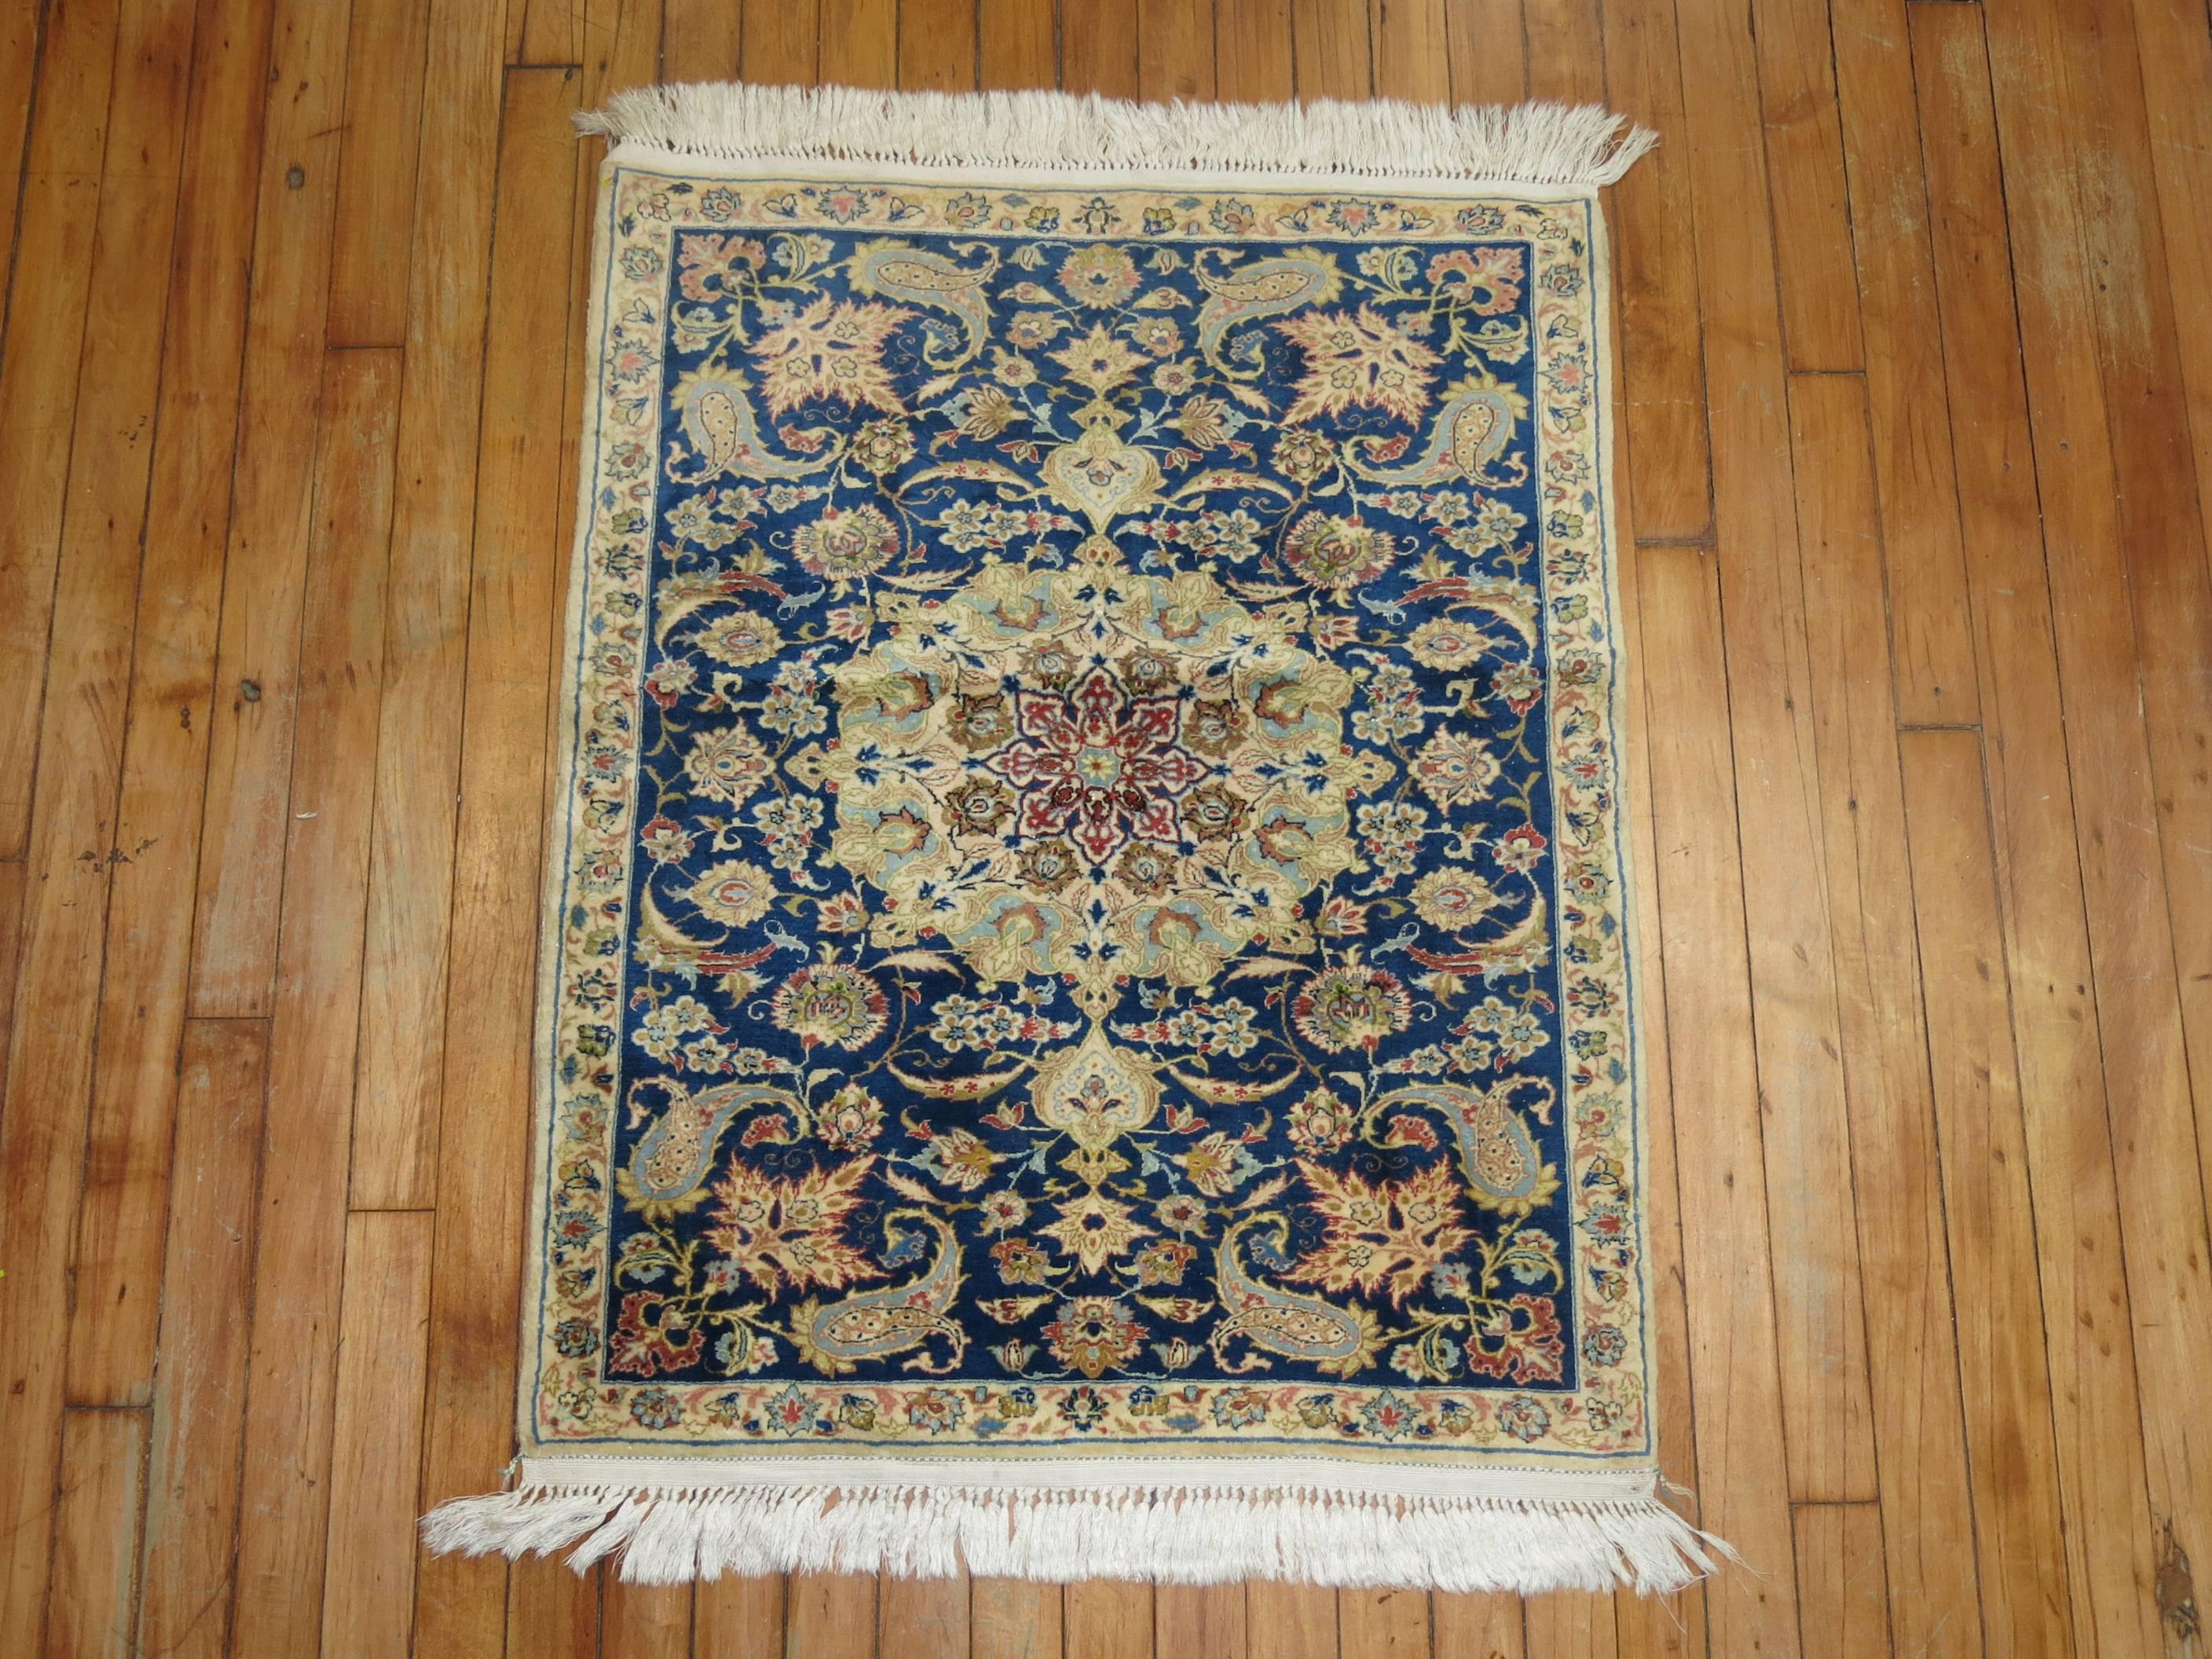 Rare size finely woven Persian Nain rug.

Nain is a small village located in central Iran that has relatively recently become a renowned center for carpet weaving. Production began here in the 1930s. Although Nain rugs are not as old as many of